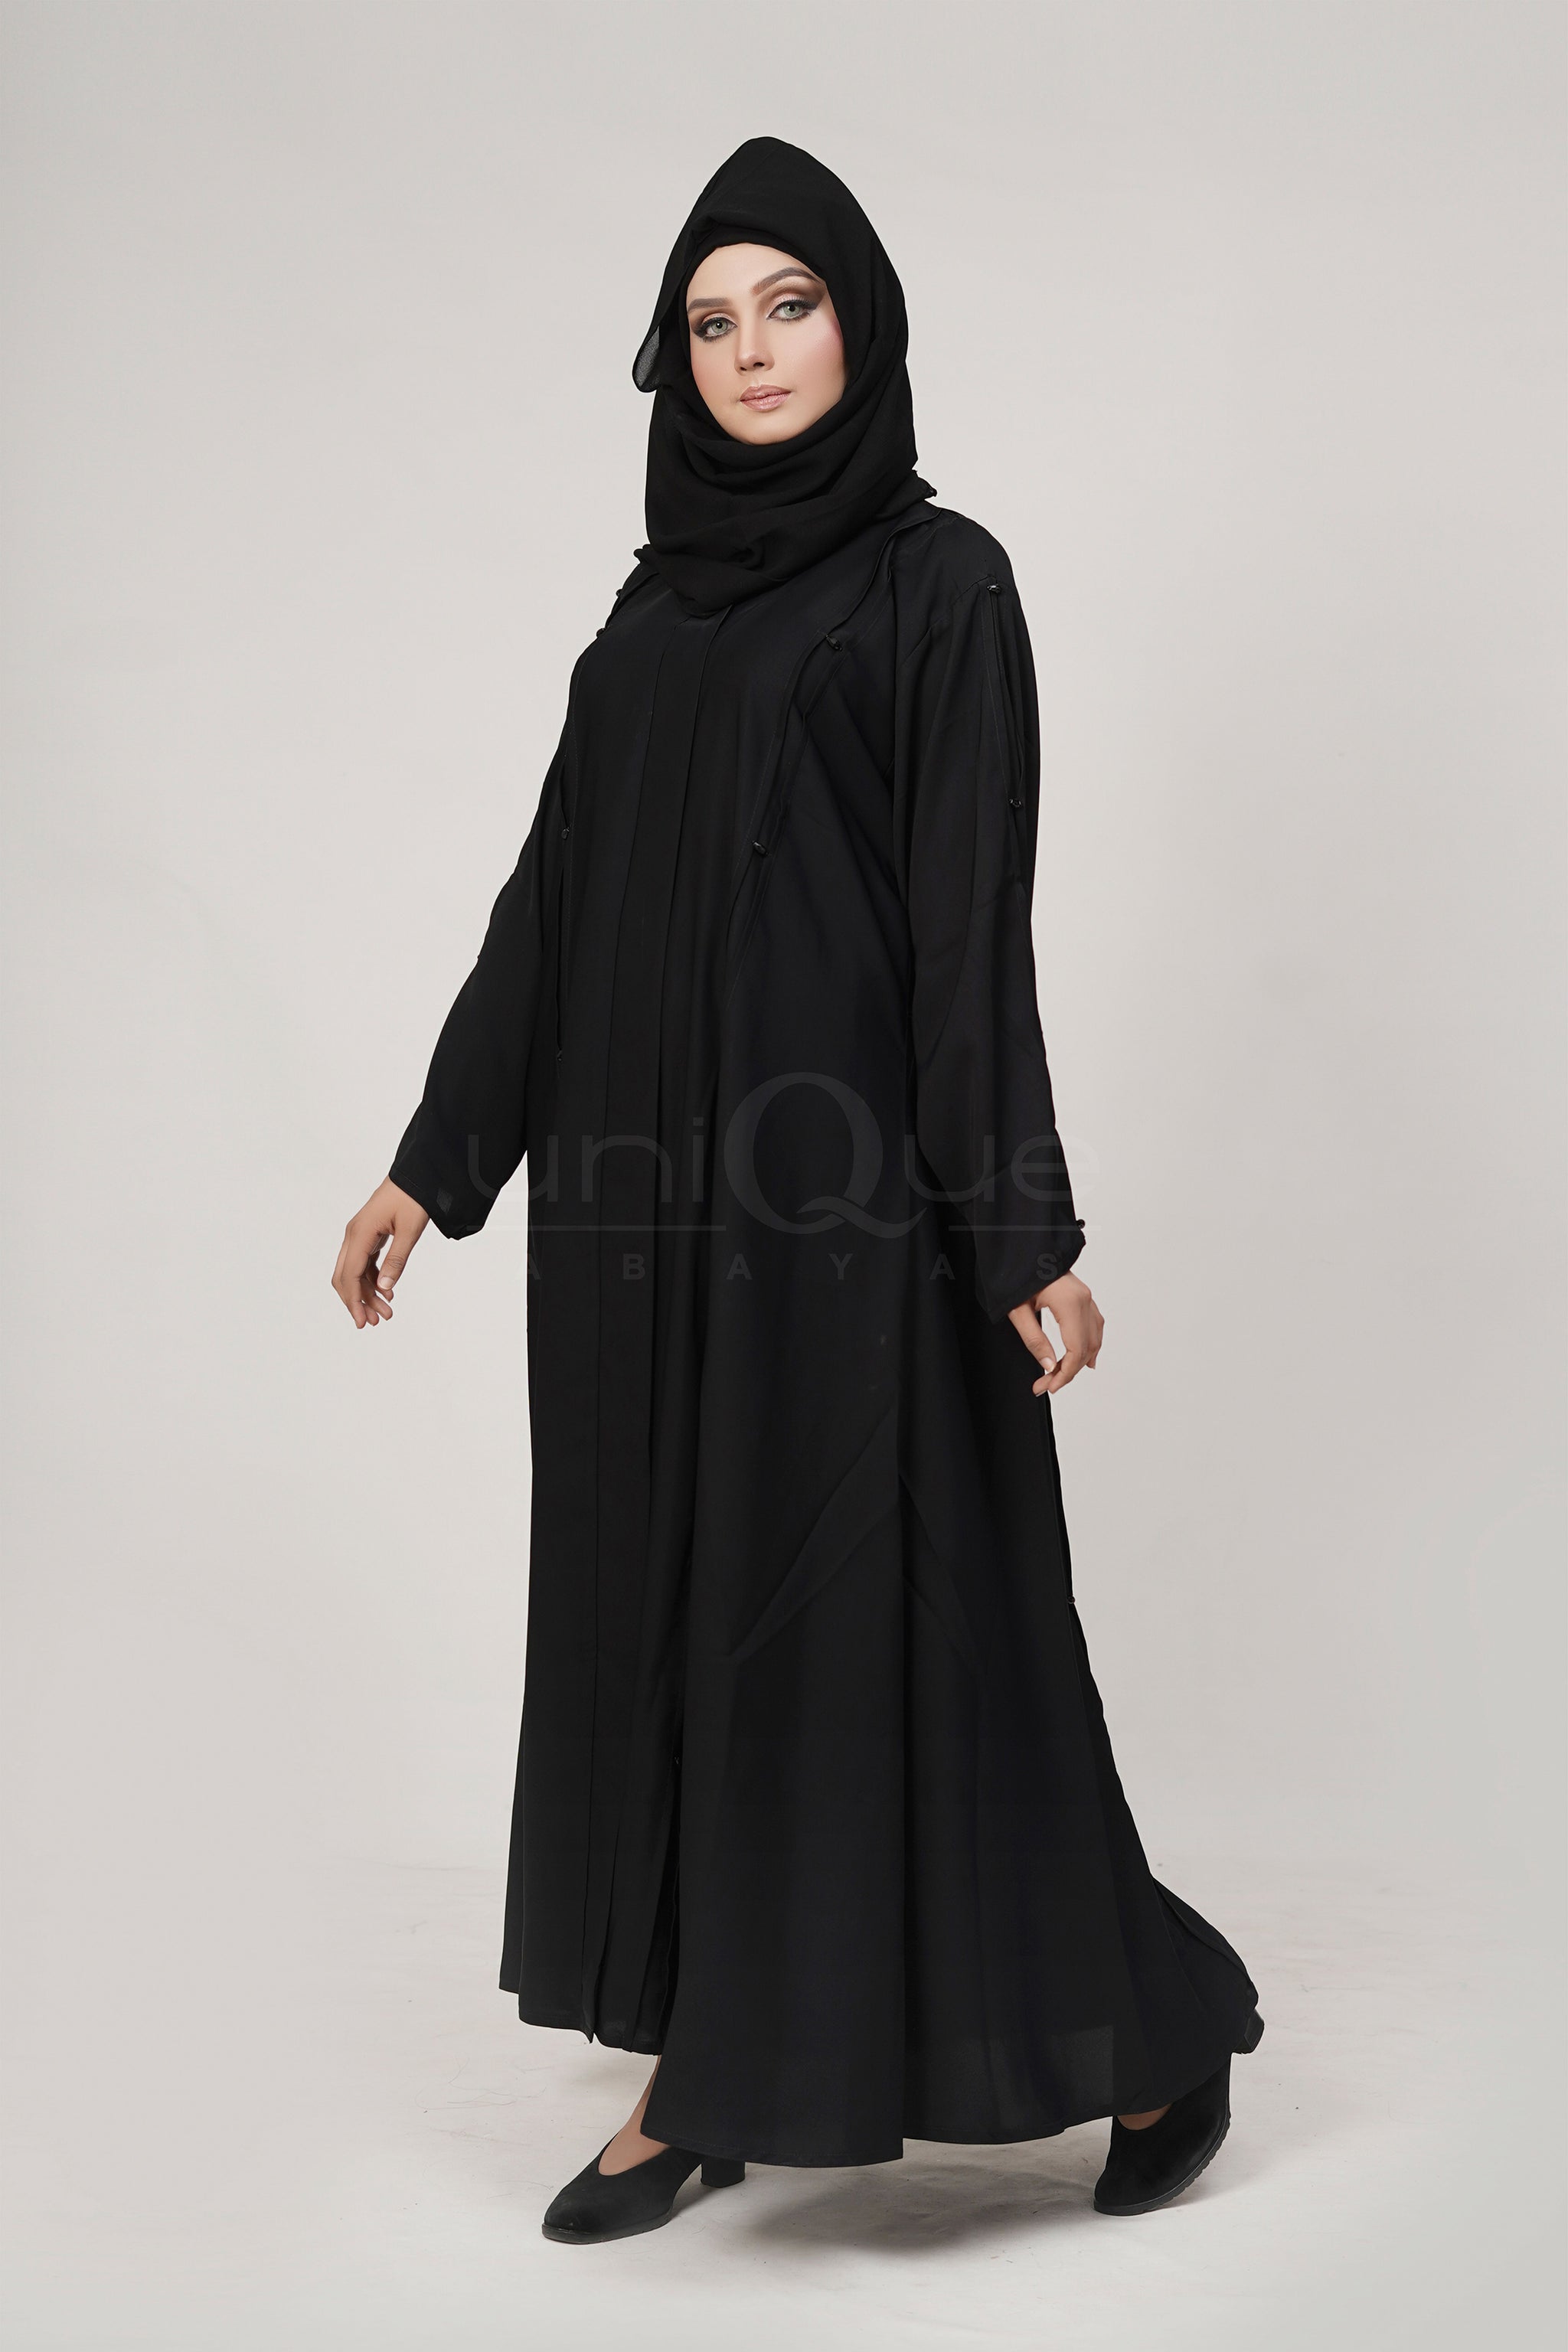 Pleated Stone Black Abaya by Uniquewallart Abaya for Women, Front Side Detailed View